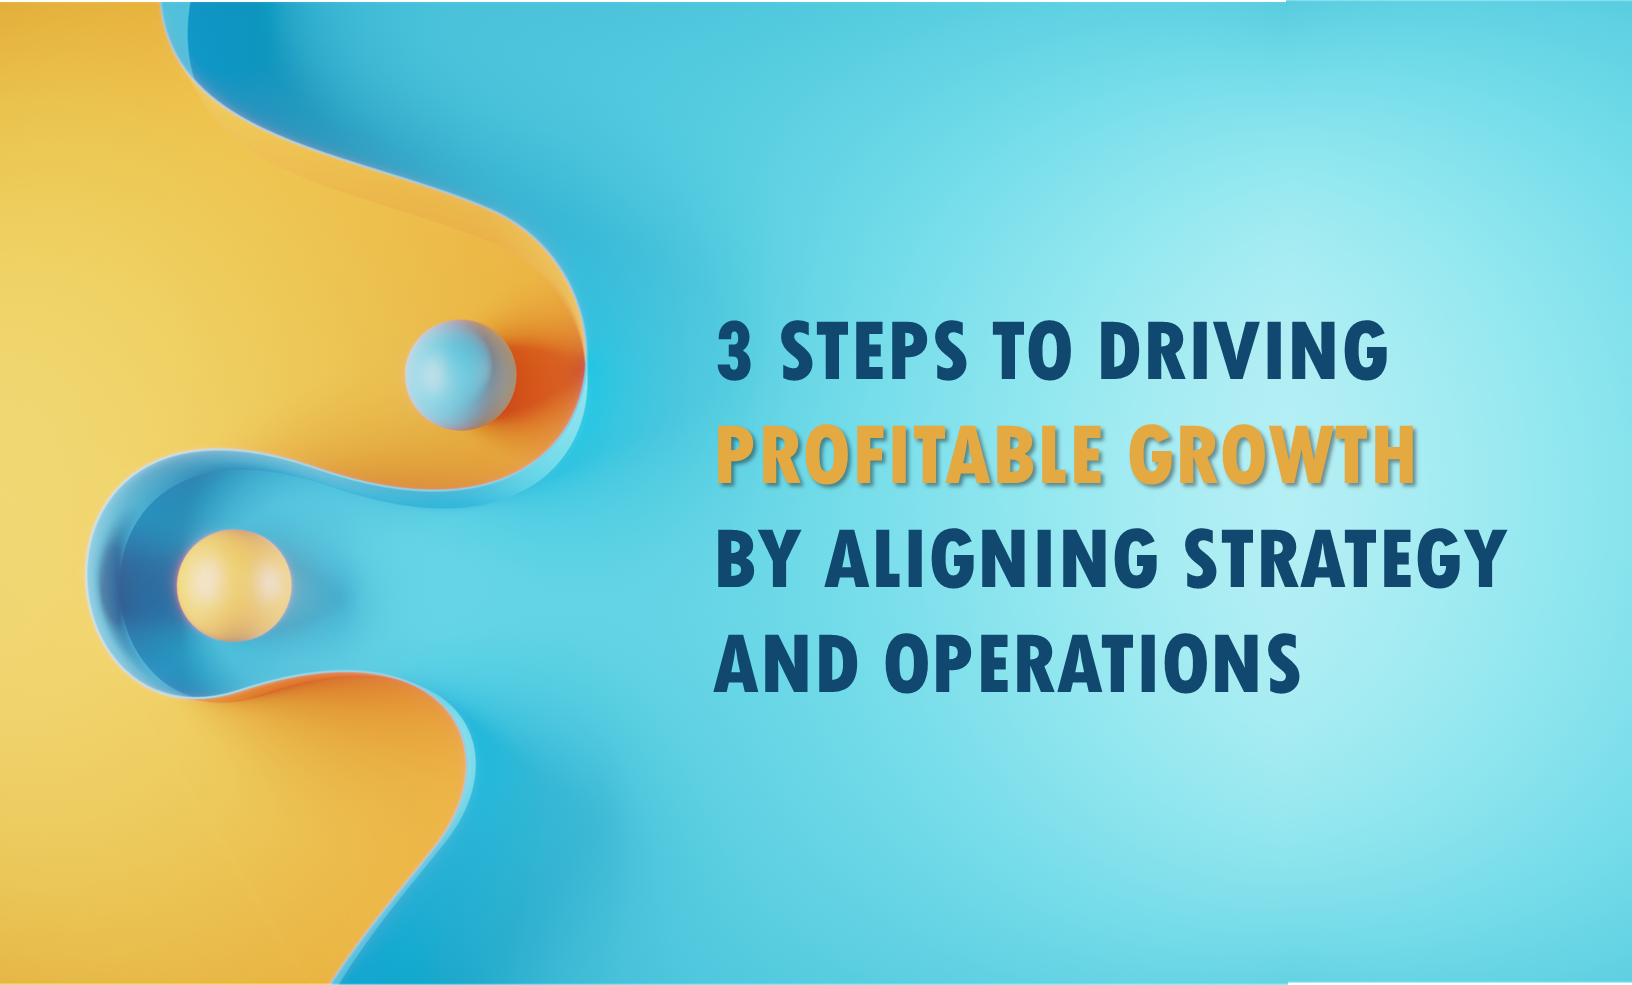 Align strategy and operations for growth v2